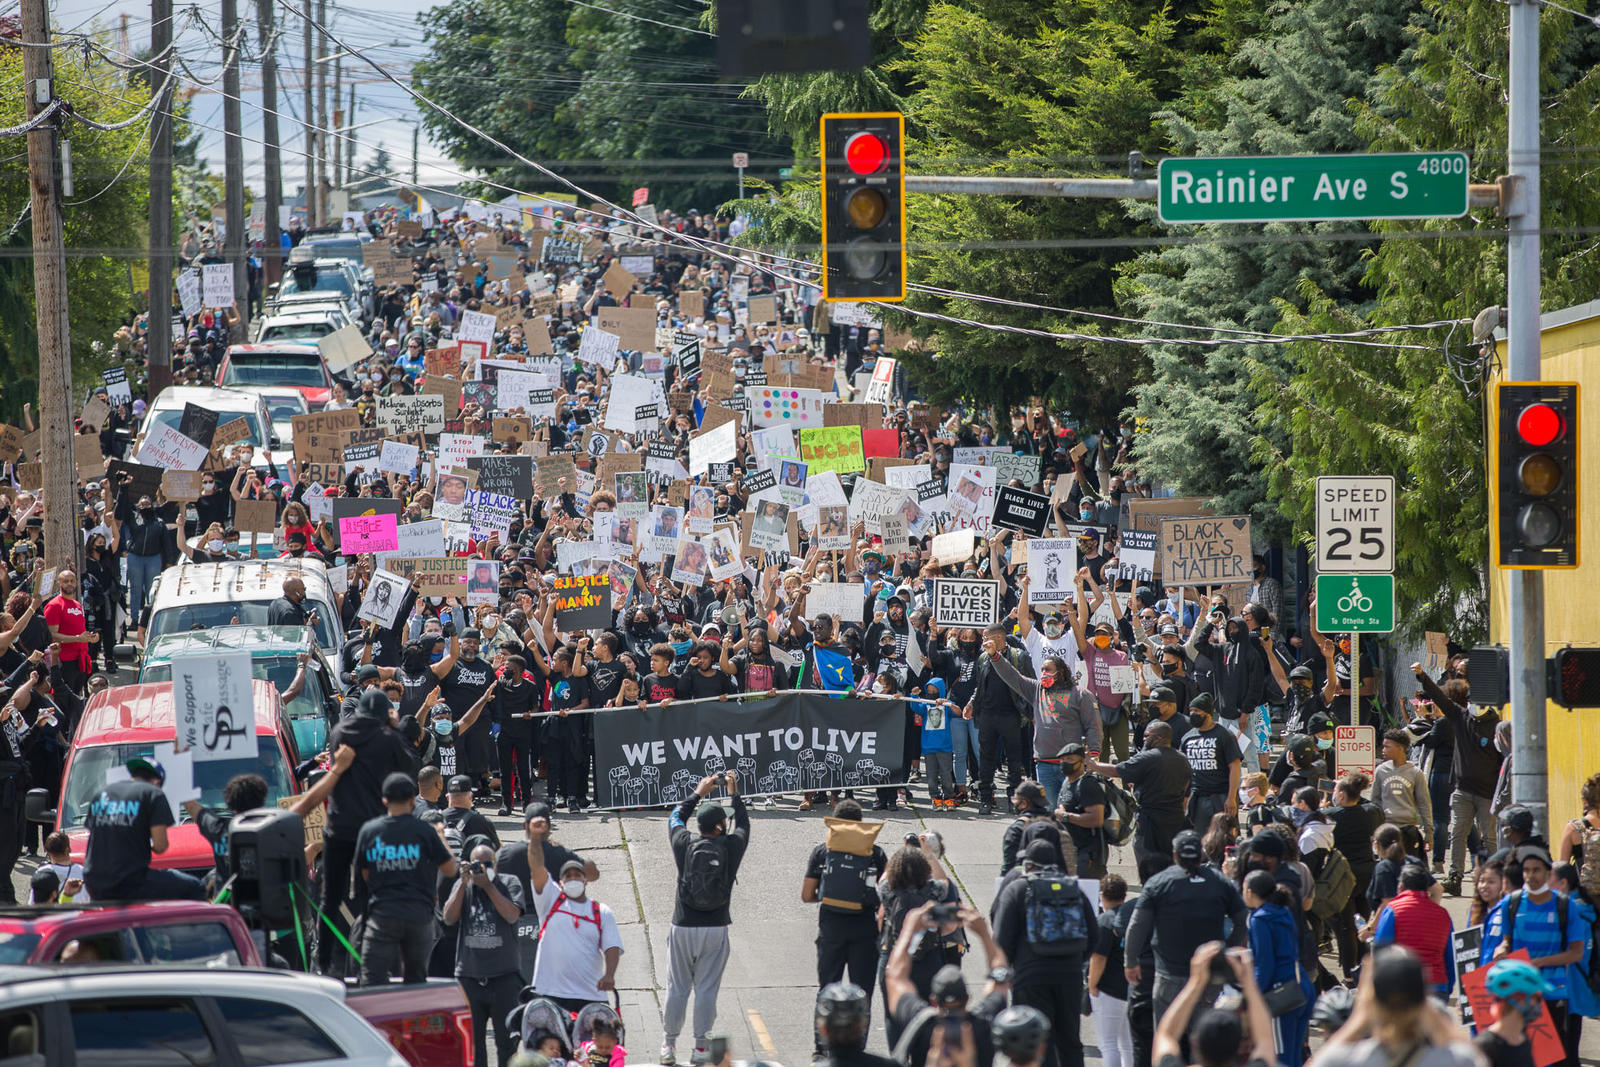 We Want To Live: Accountability march in Seattle